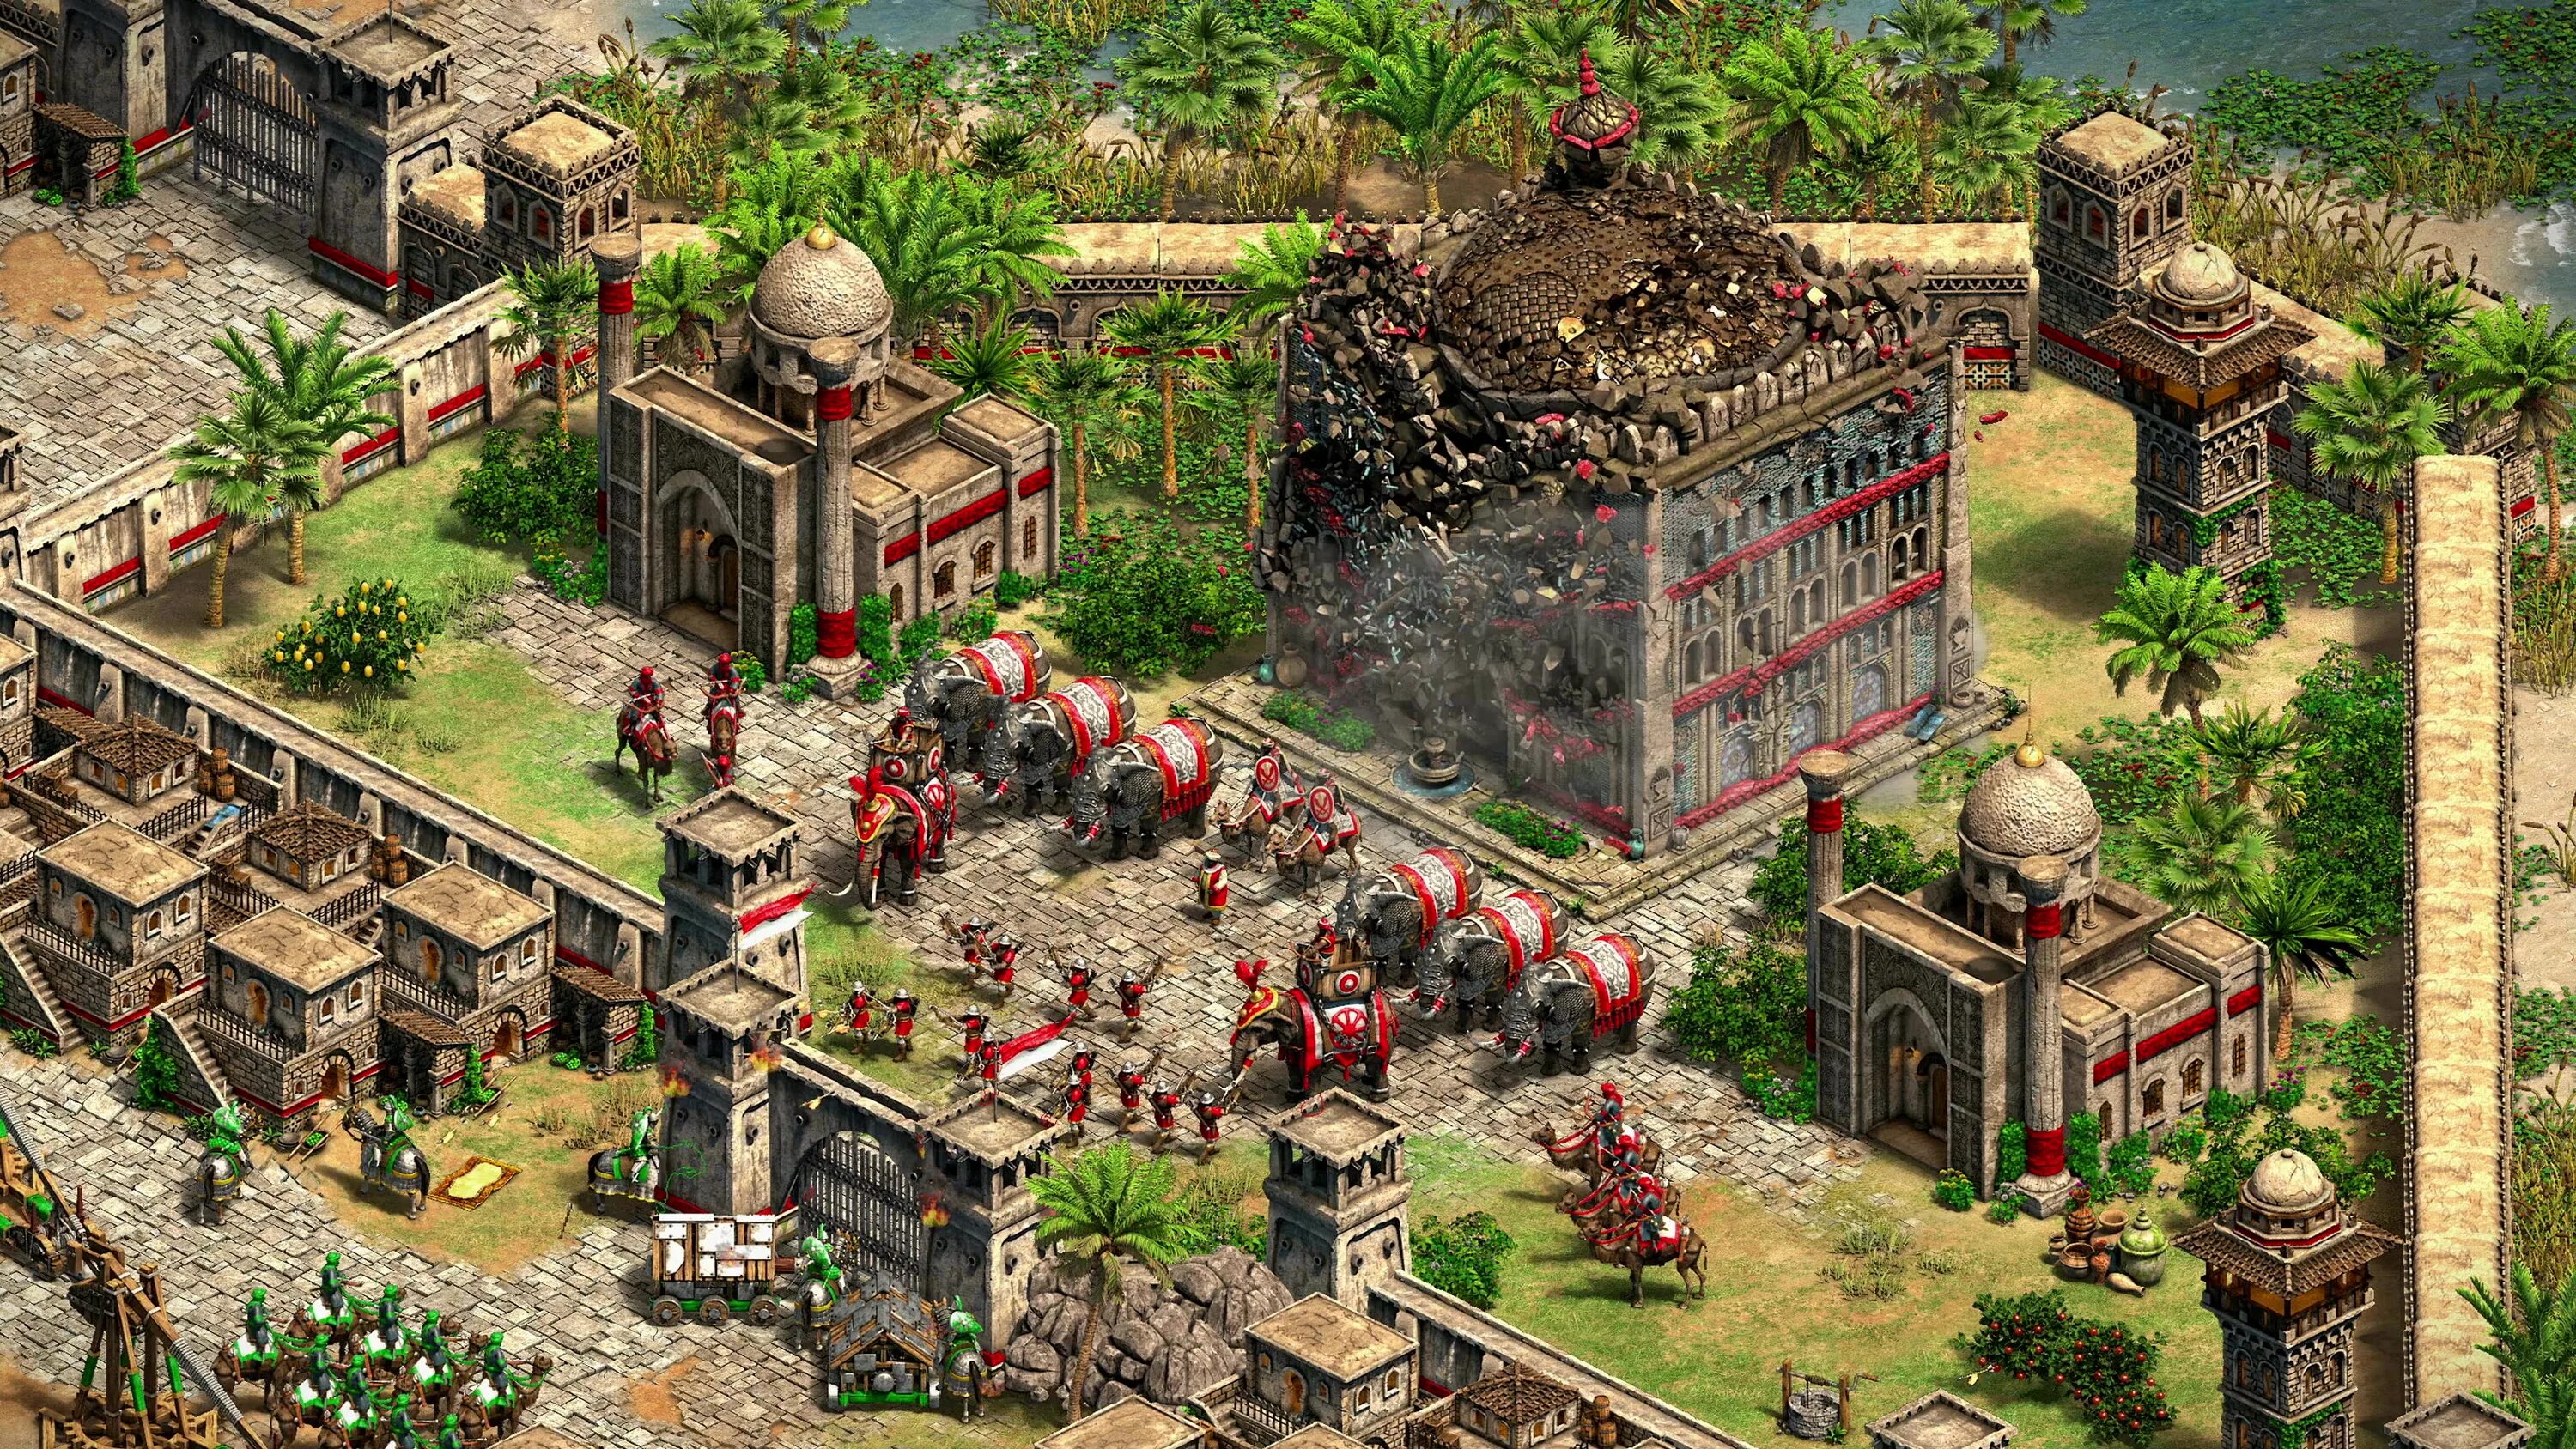 Age of Empires 2 Definitive Edition. Age of Empires II (2): Definitive Edition. Эпоха империй Definitive Edition. Аге оф Империя 2 Definitive Edition. Age pf